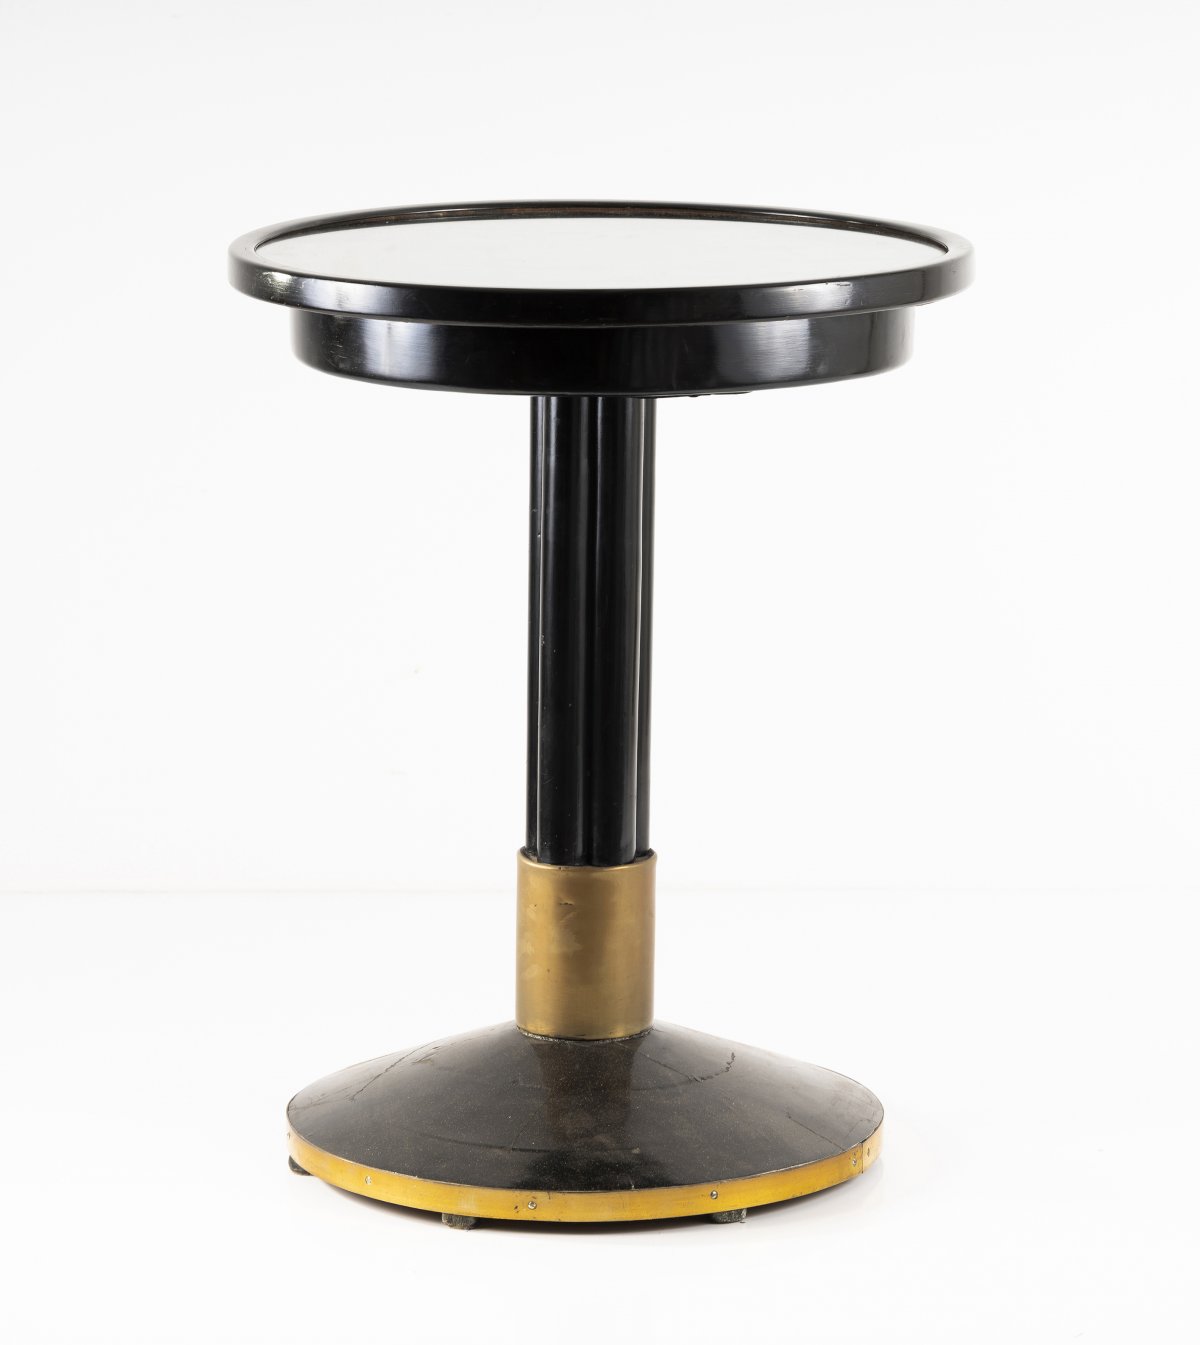 Josef Hoffmann (in the style of), '1260' table, c. 1911'1260' table, c. 1911H. 76 cm, D. 60.5 cm. - Image 2 of 4